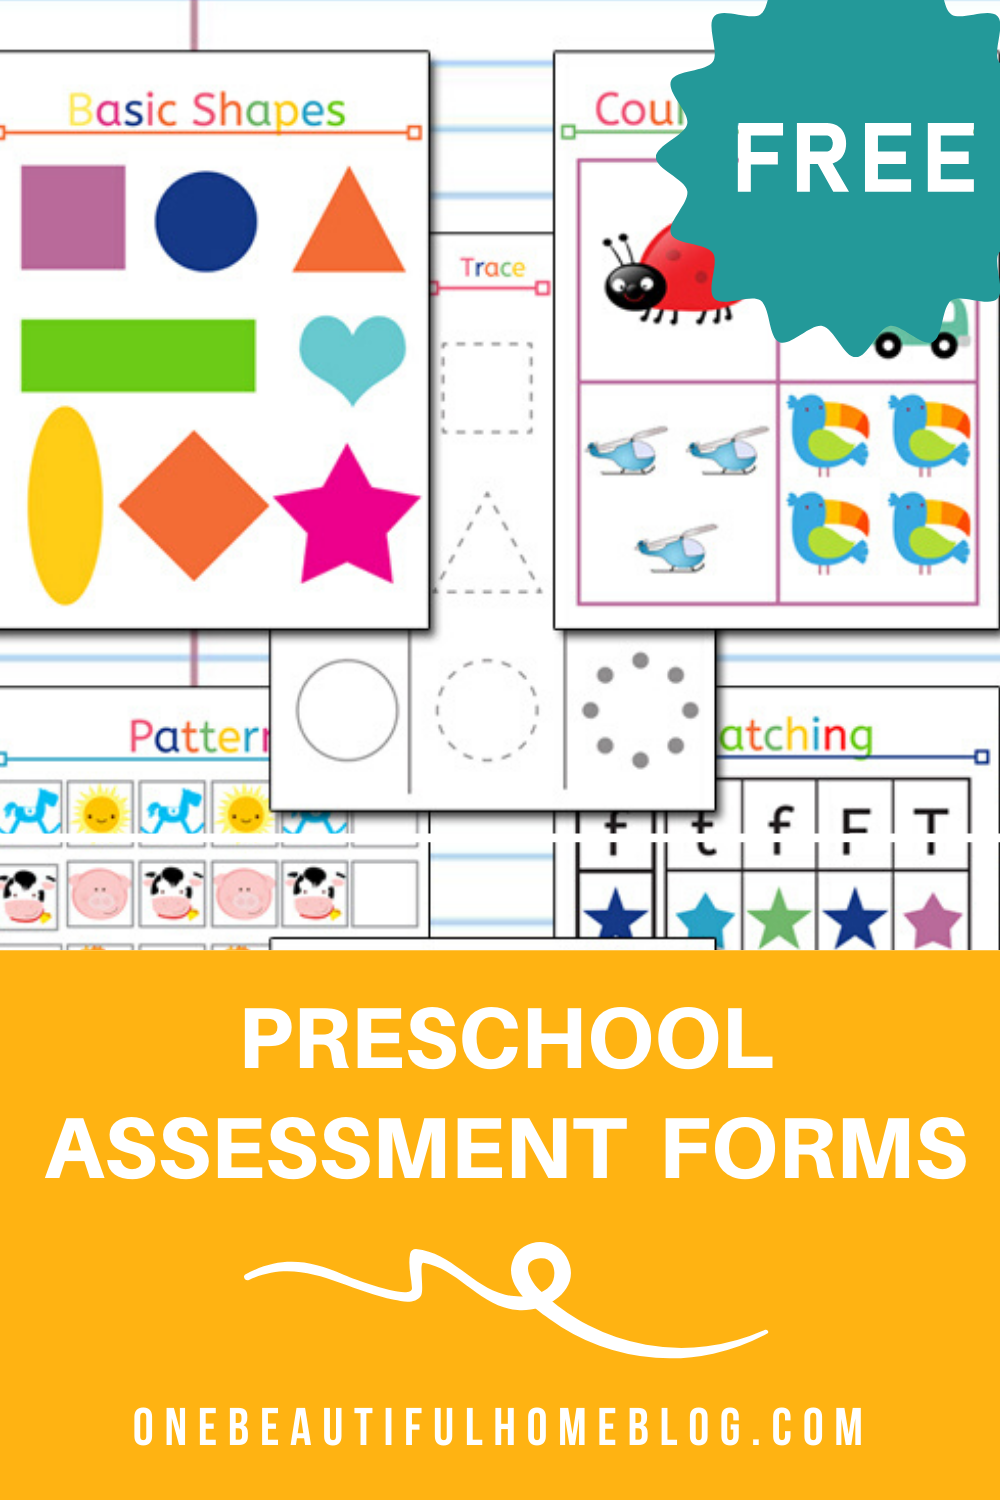 printable-preschool-assessment-forms-for-3-year-olds-printable-forms